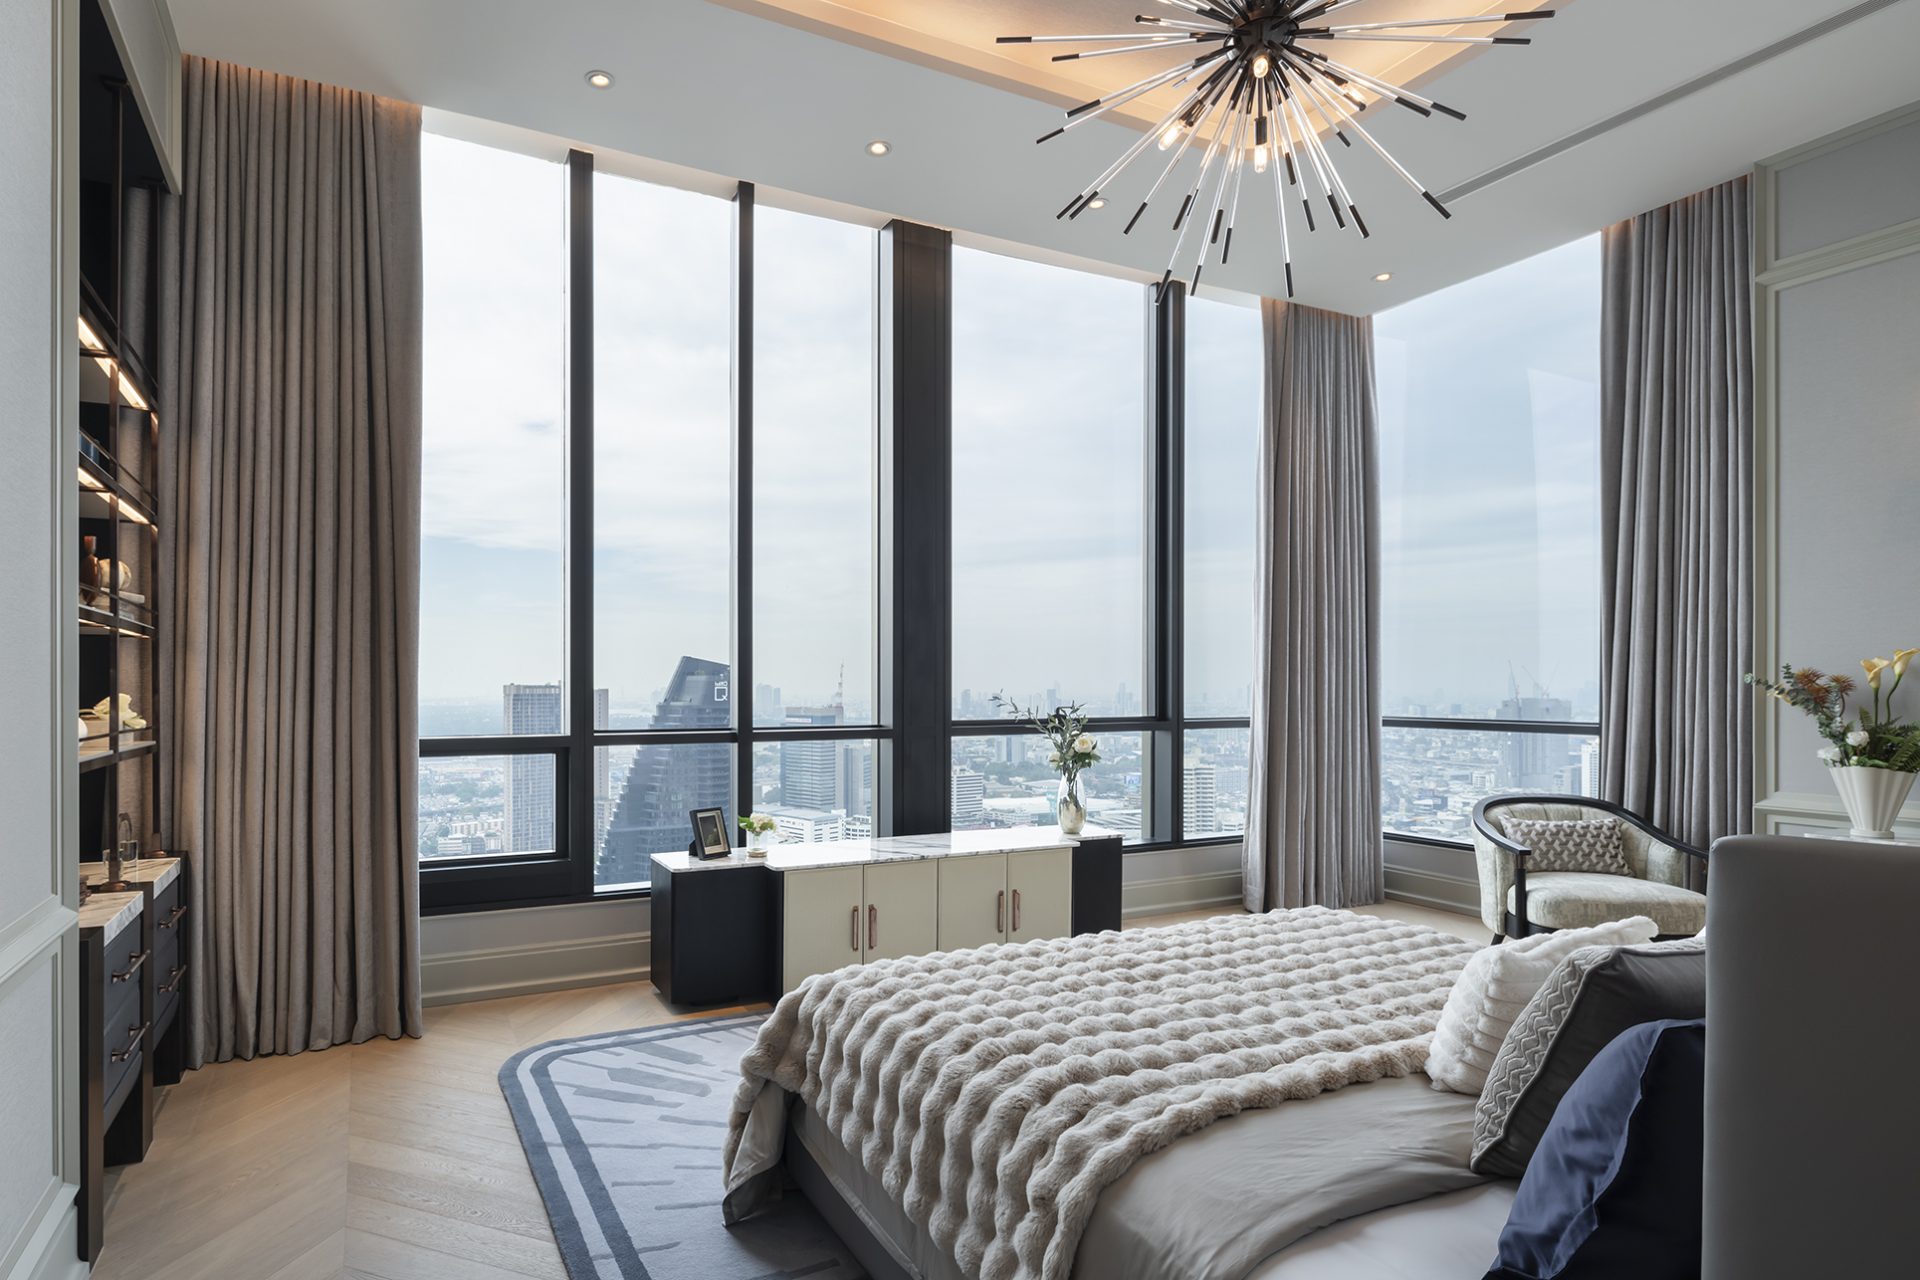 Luxury Penthouse Interior Design: Elevating Urban Living to New Heights